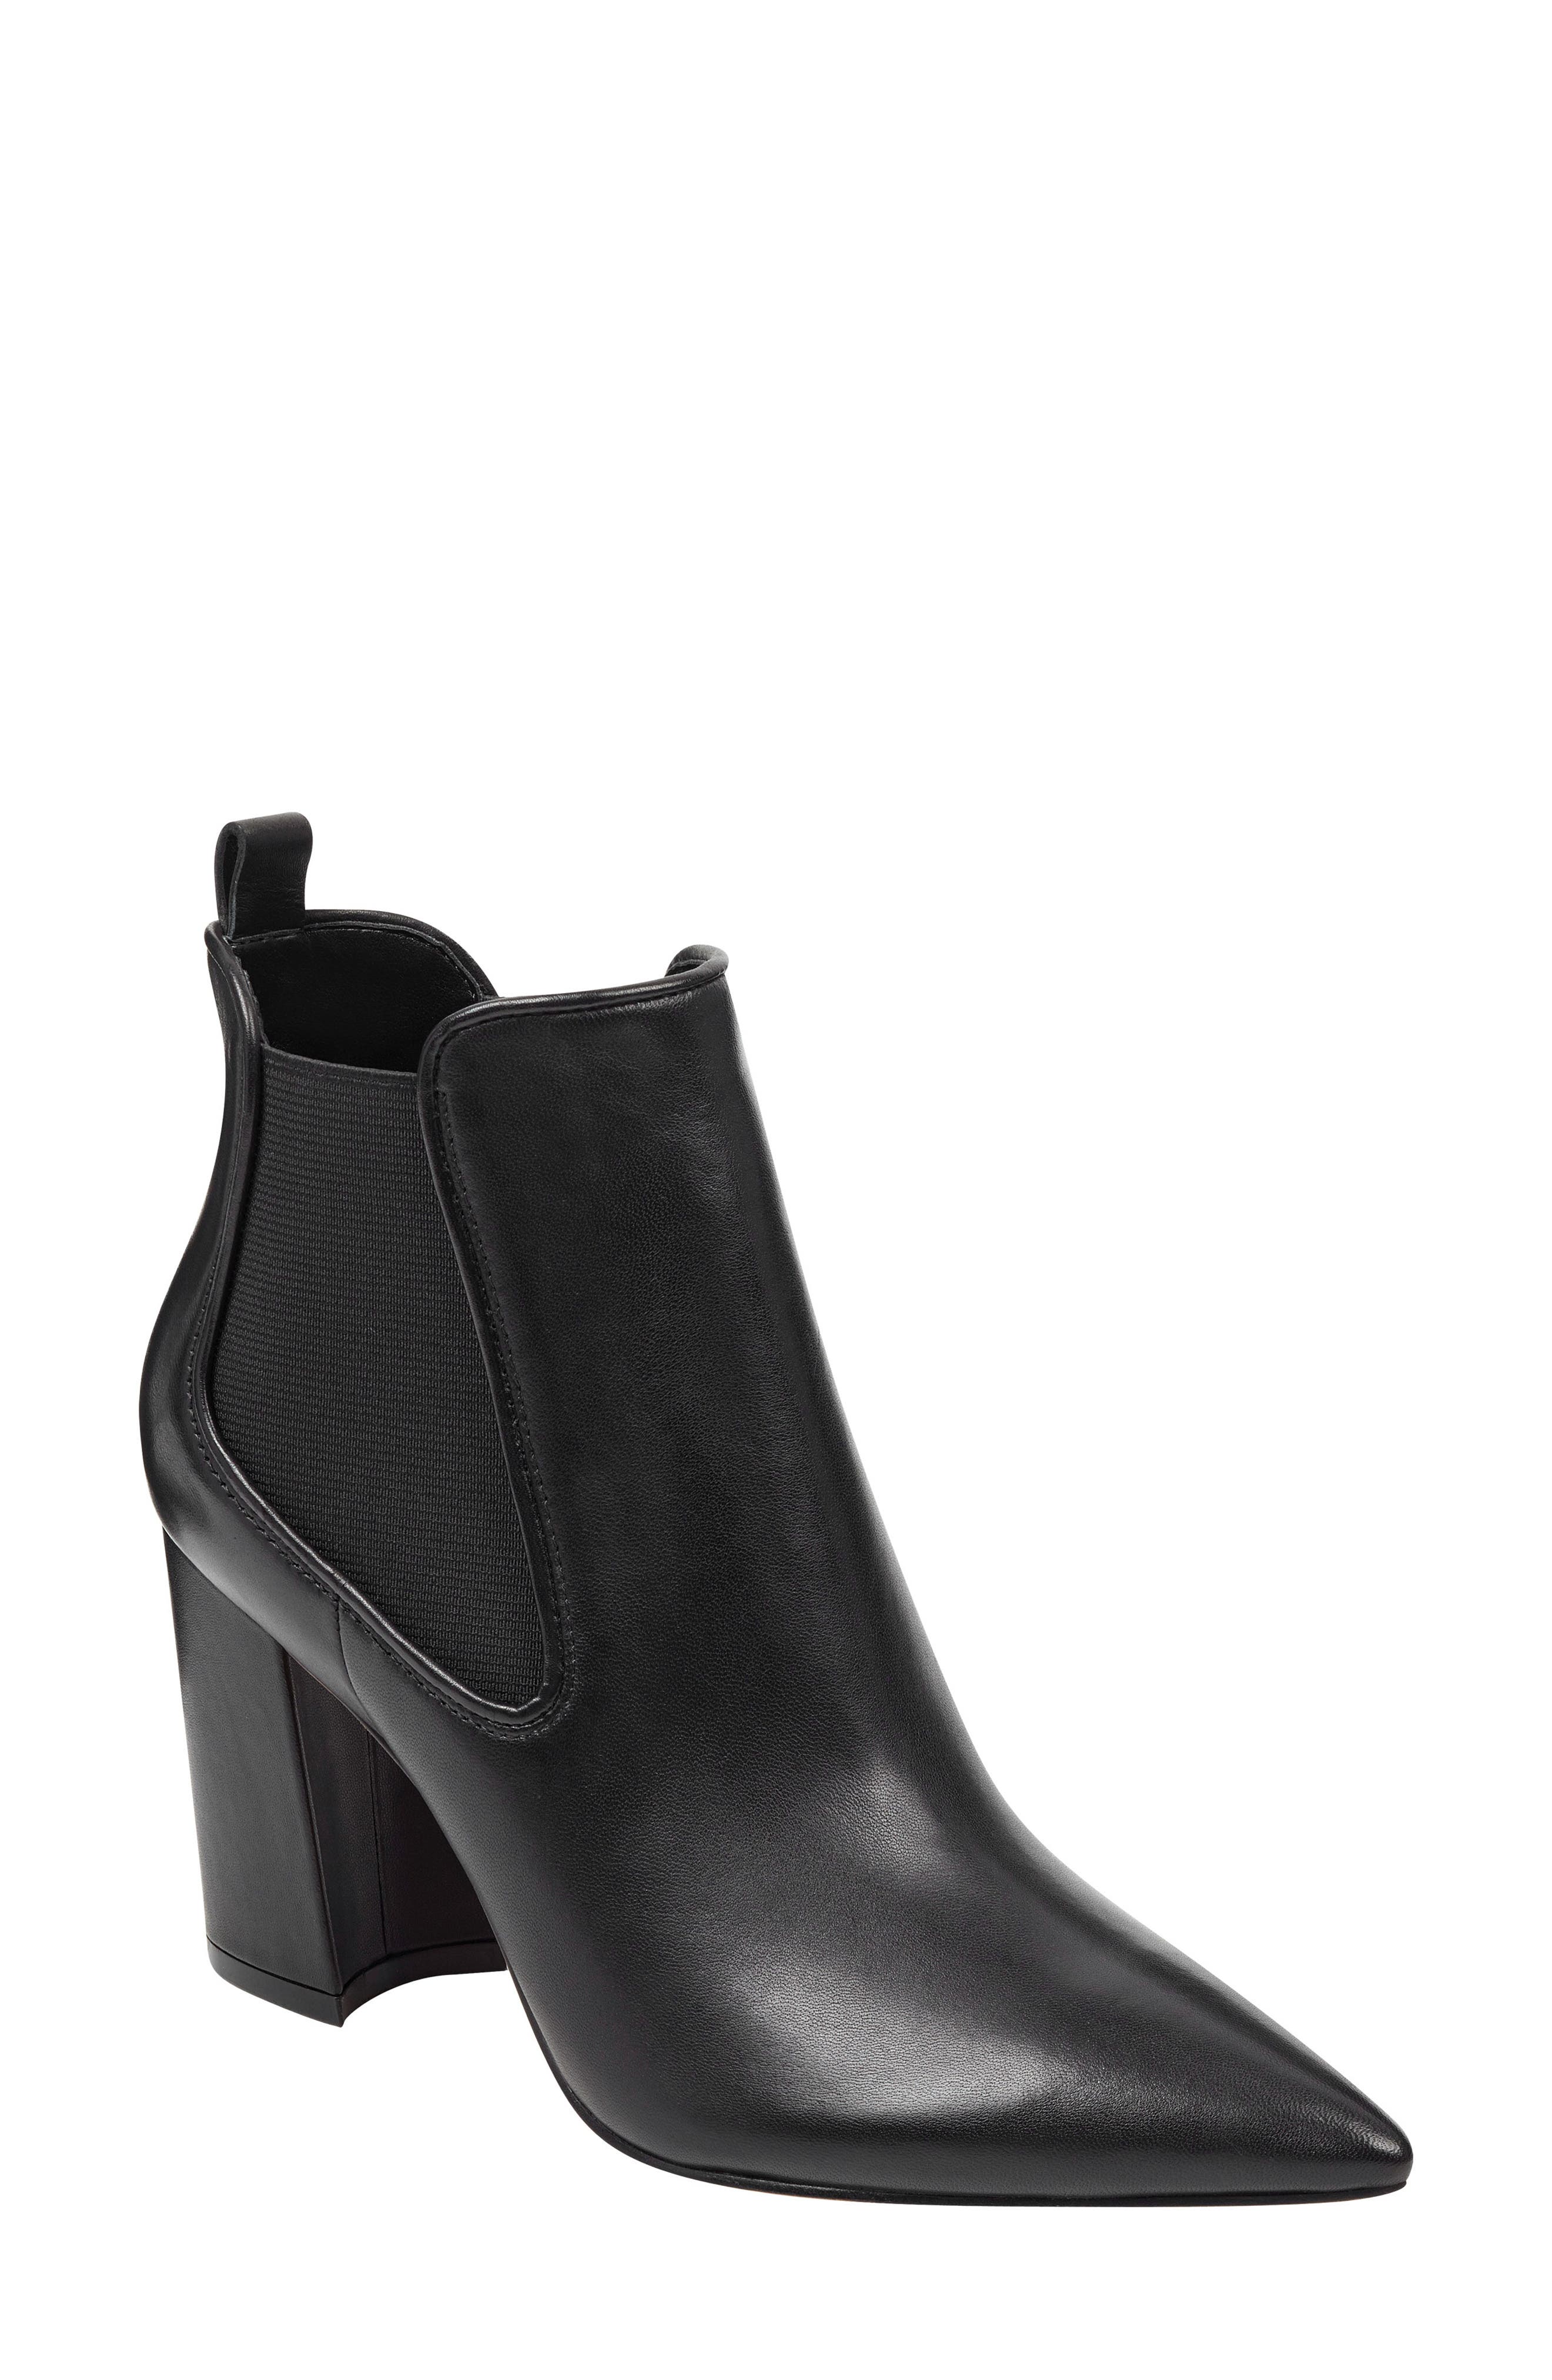 marc fisher pointed toe boots